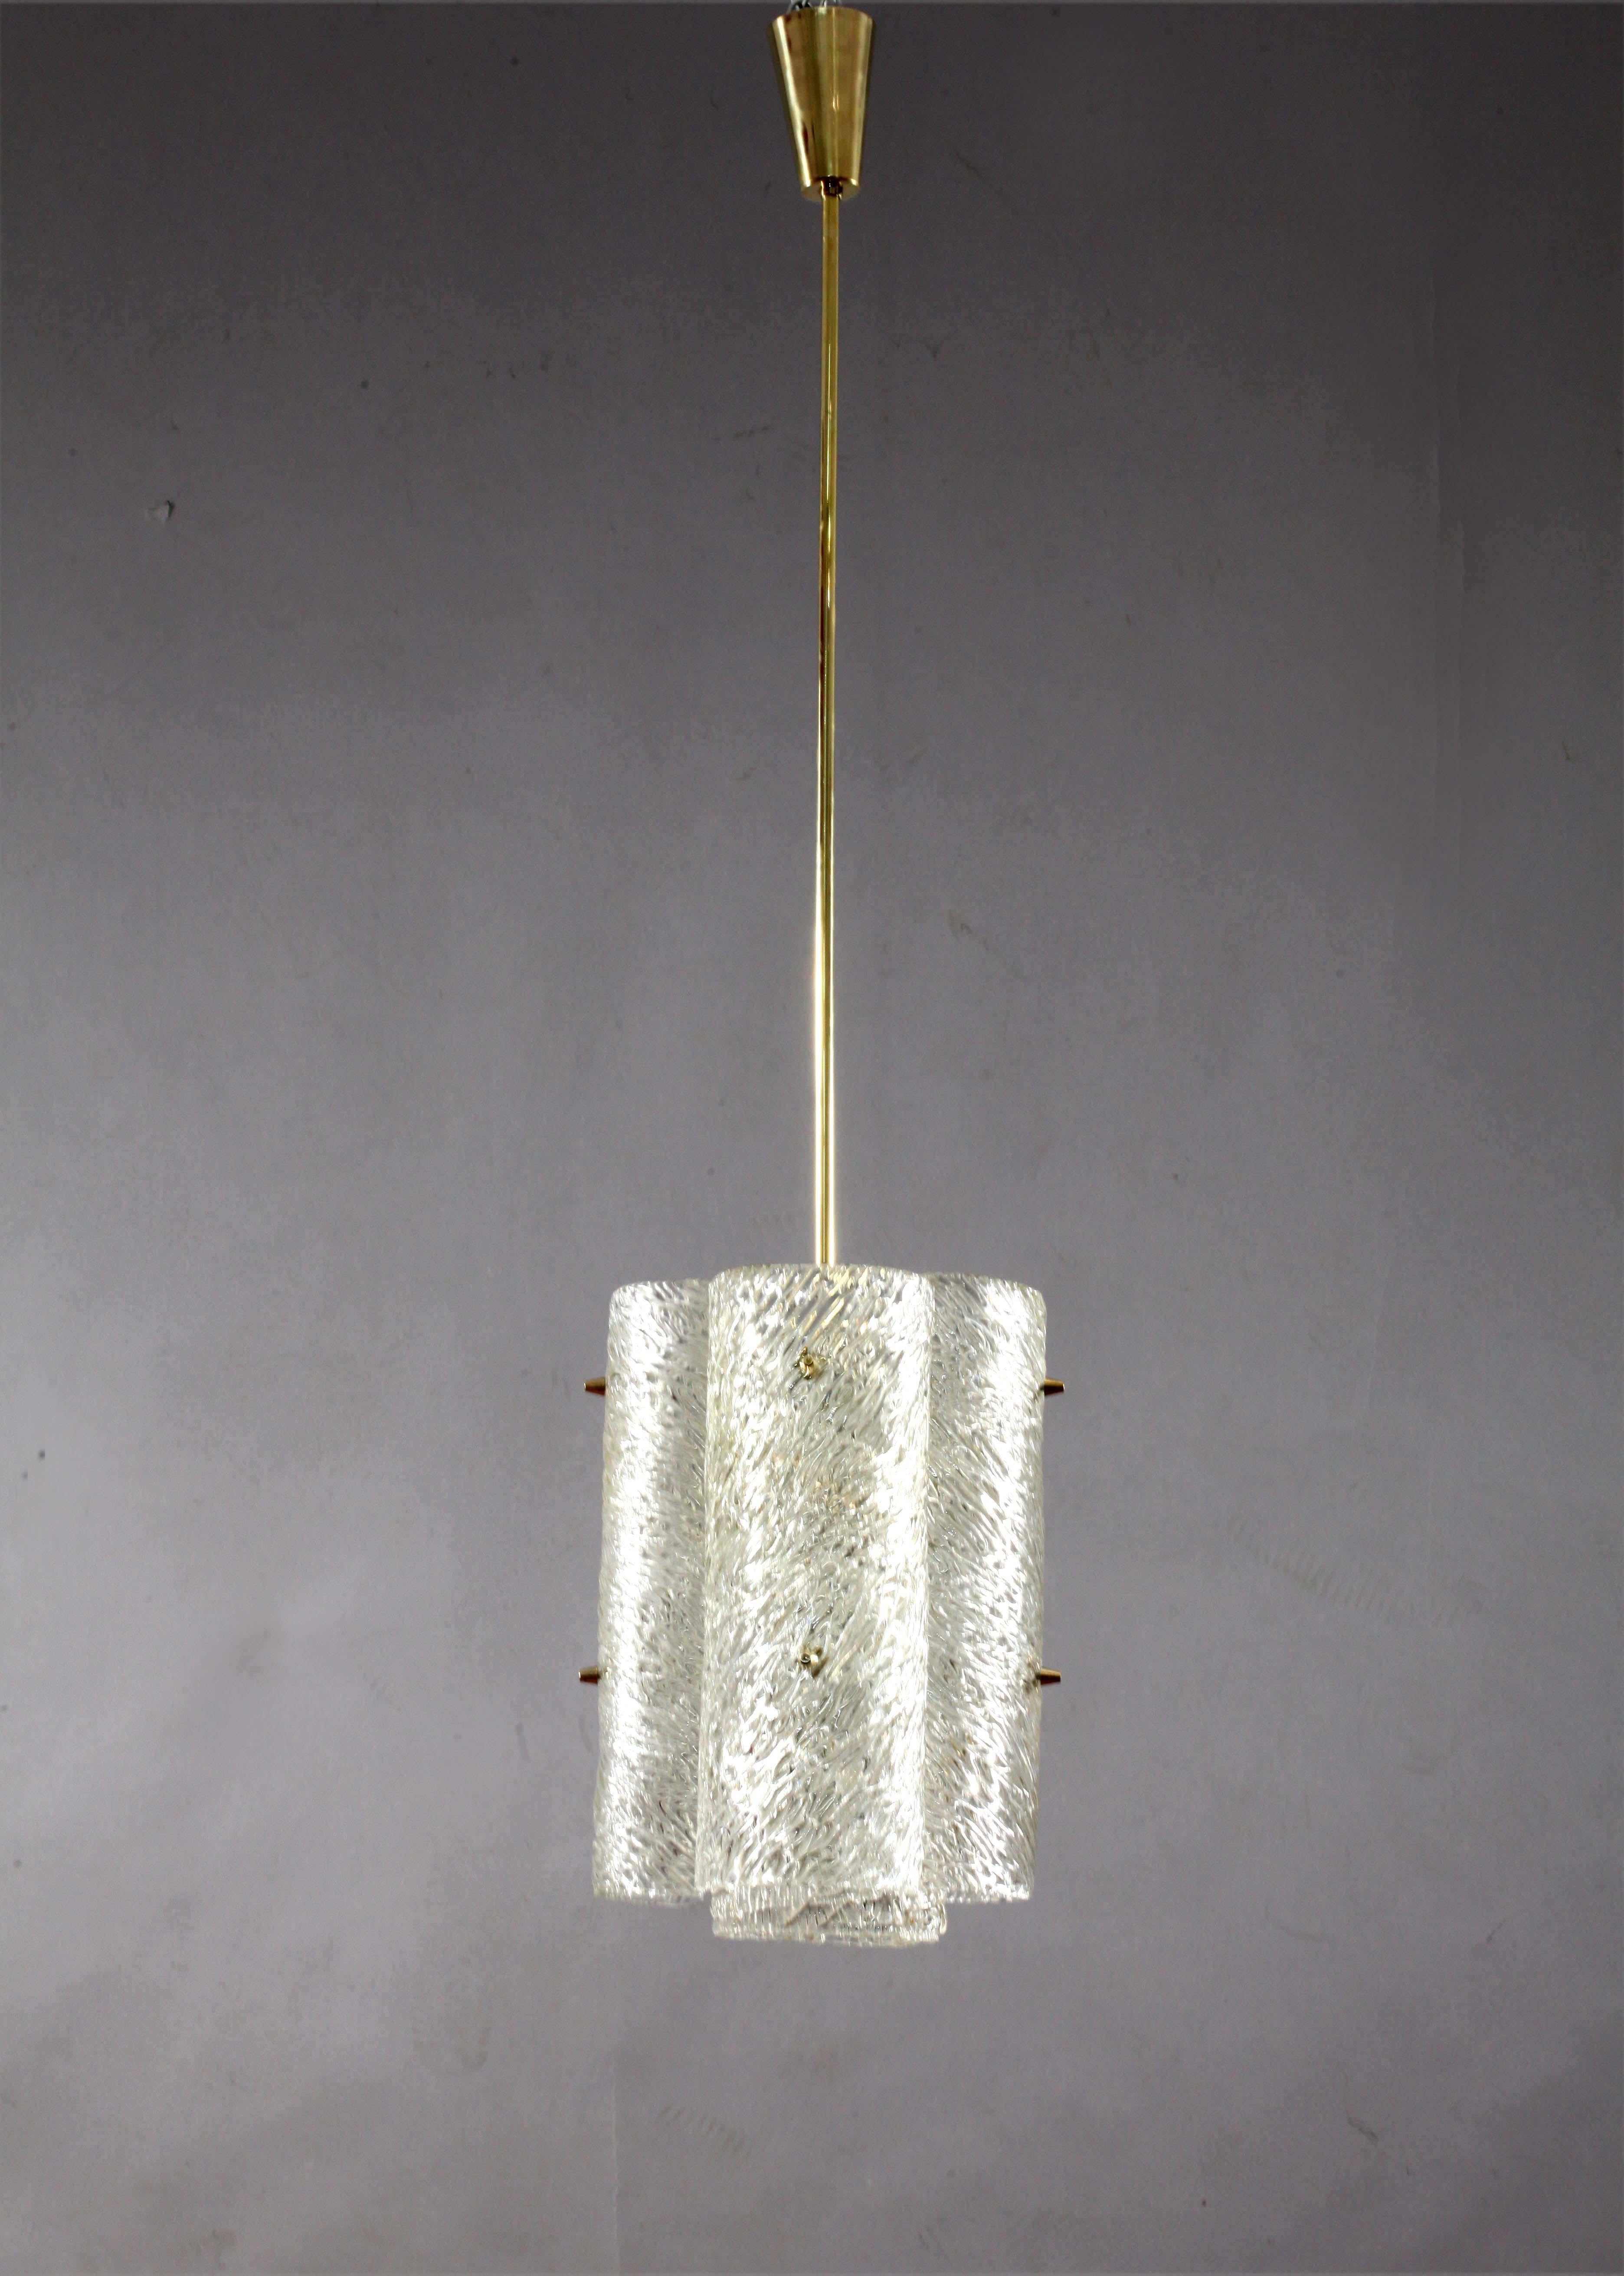 Three chandeliers,
J. T. Kalmar 
Vienna 1960
textured Ice glass chandelier,
lacquered brass , brass stam, five bulbsockets E 27.
Please note that we can provide you with different sizes/length of stems or even switch to a chain, according to